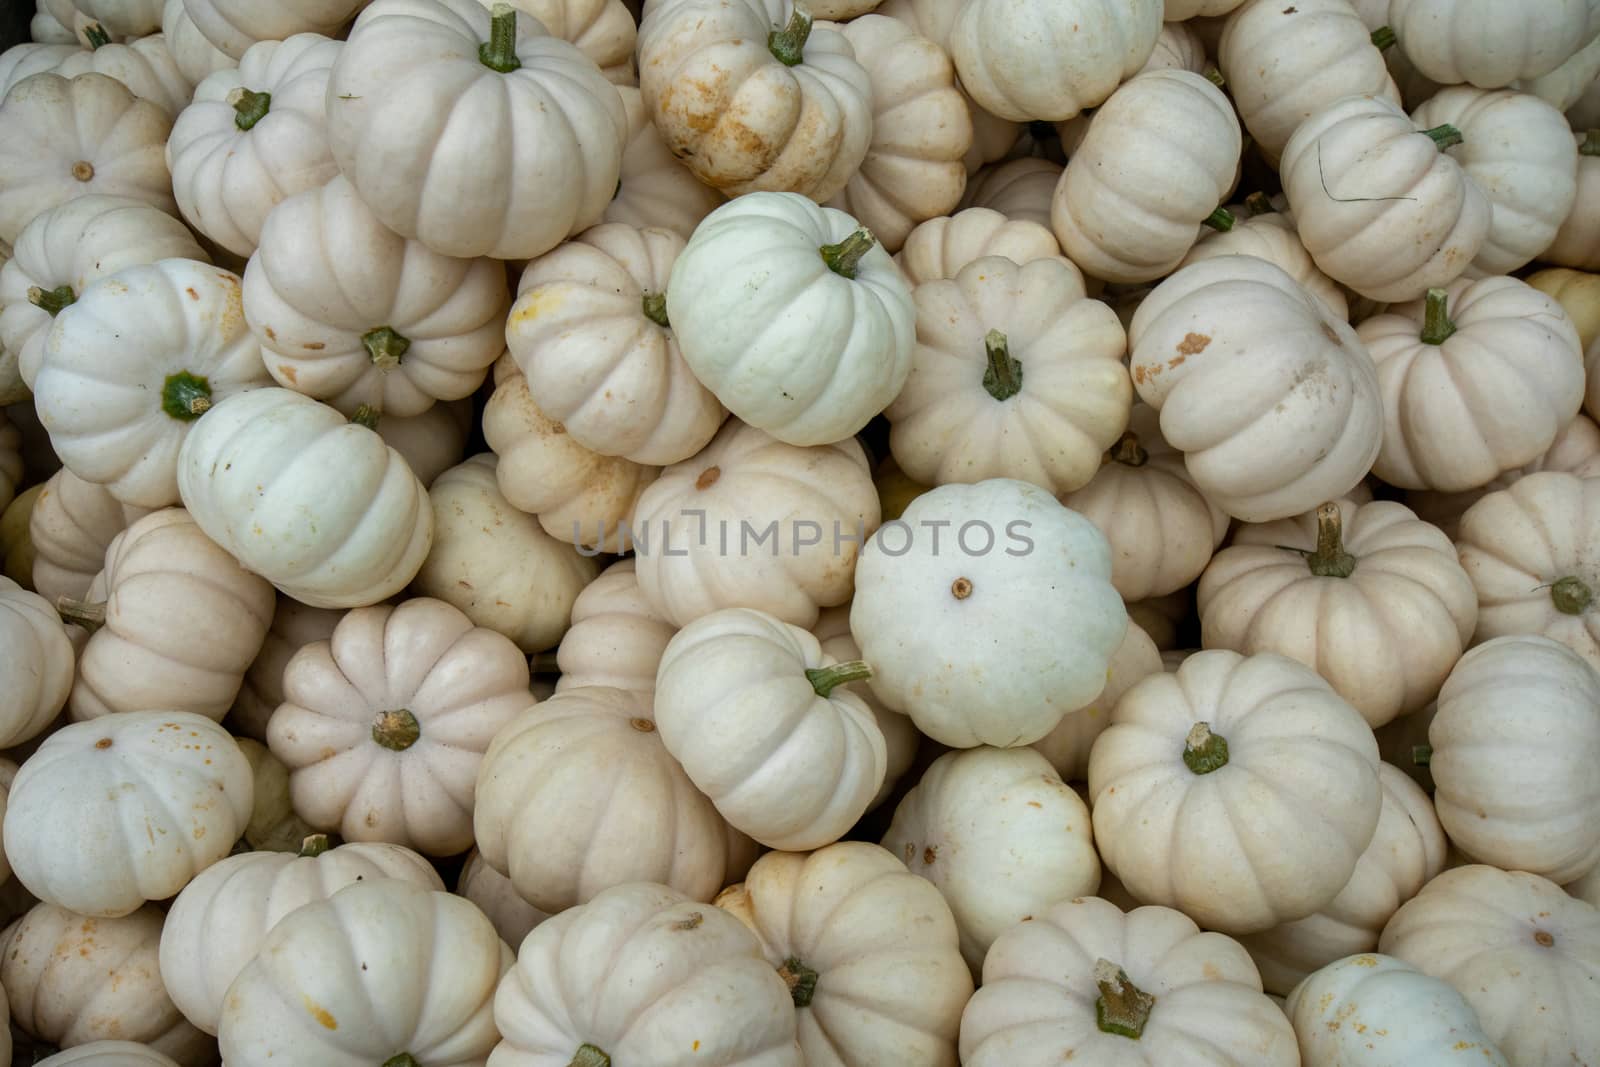 Small White Pumpkins in a Pile Filling the Frame by bju12290